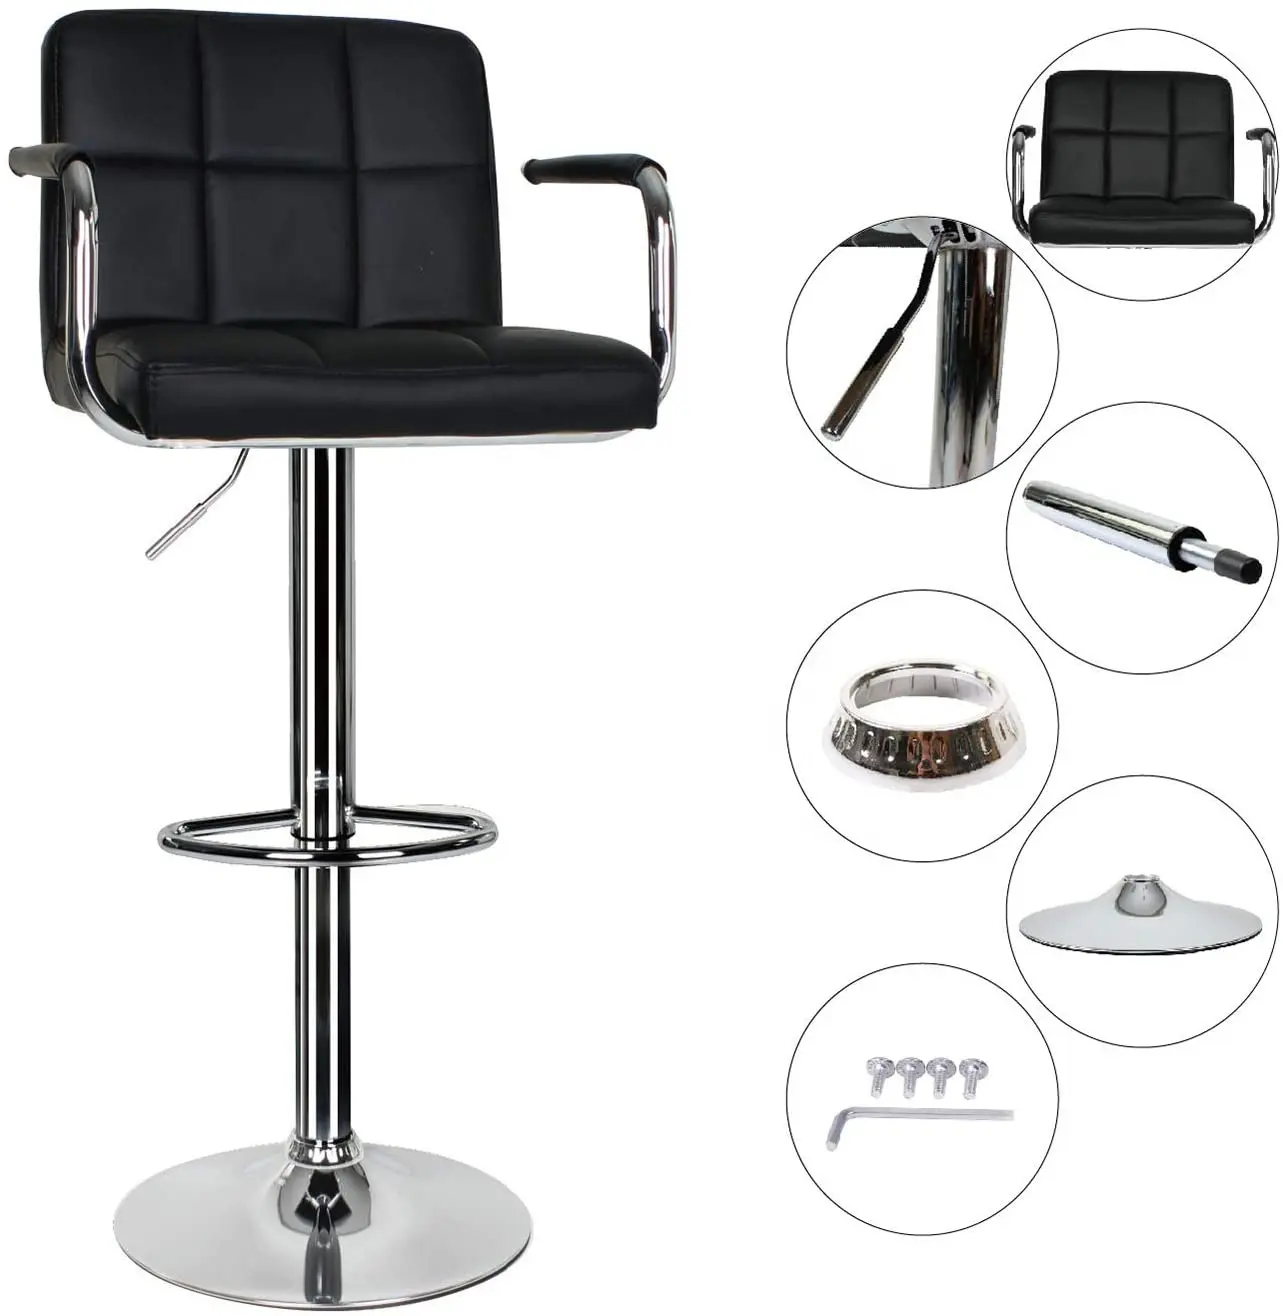 Black Leather Kitchen Swivel Gas Lift Breakfast Bar Stool with Armrest and Chrome Footrest